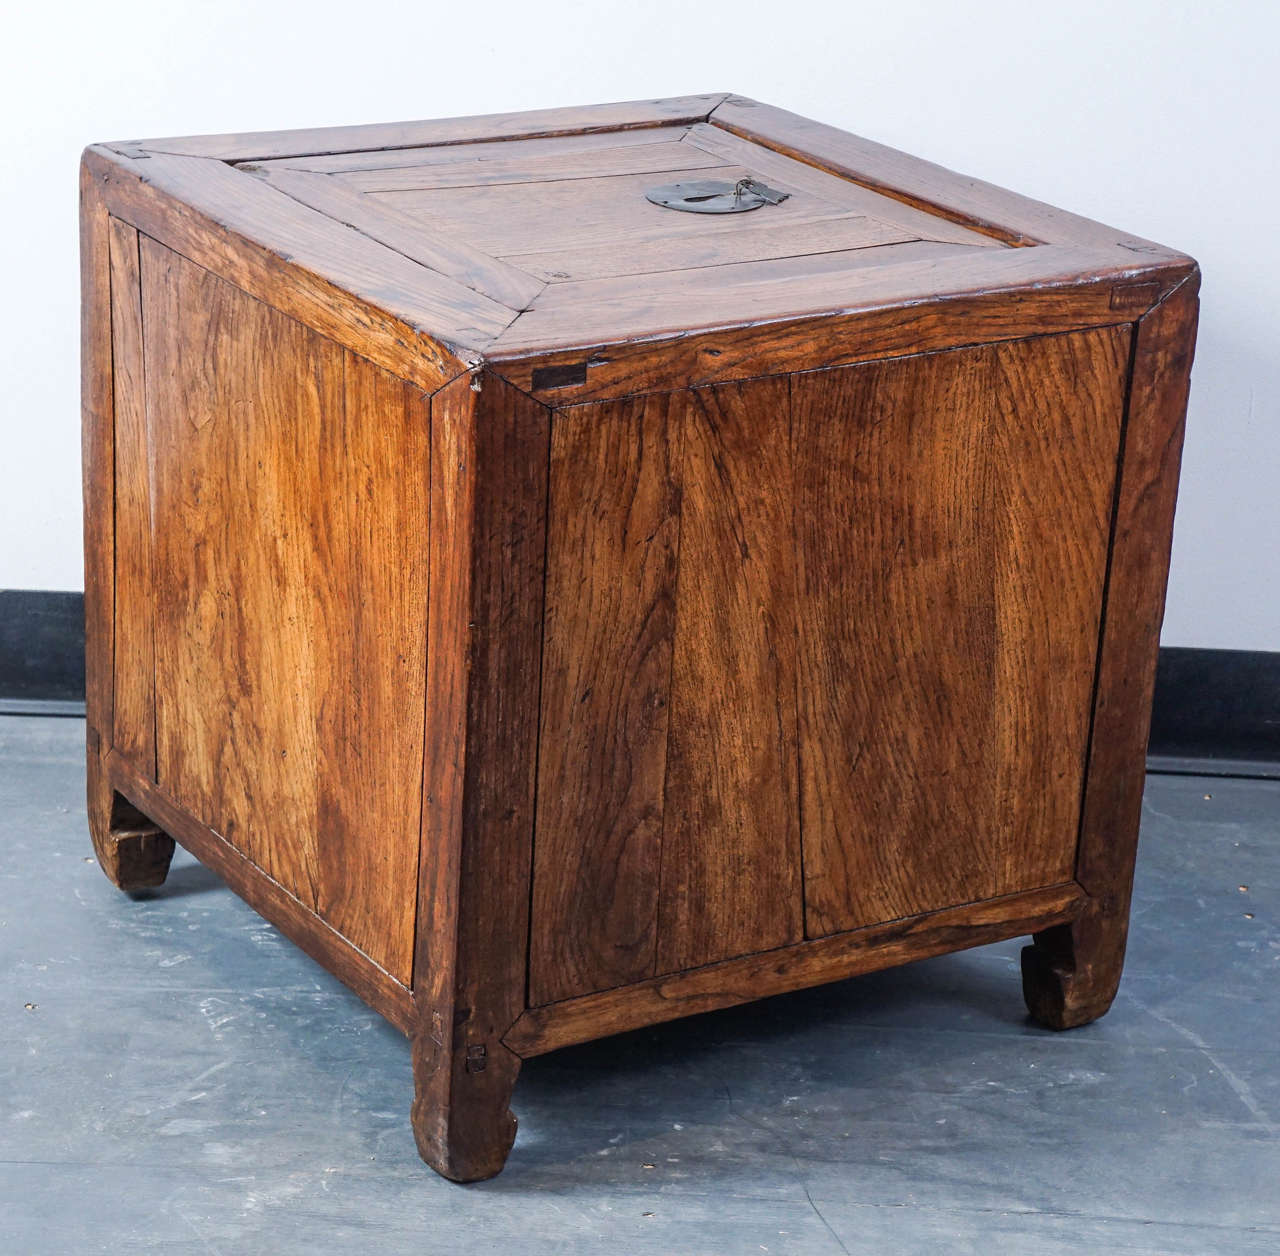 Spare modern form. These boxes created a 100 years ago in Asia were meant for storage. Made from a beautiful elmwood.